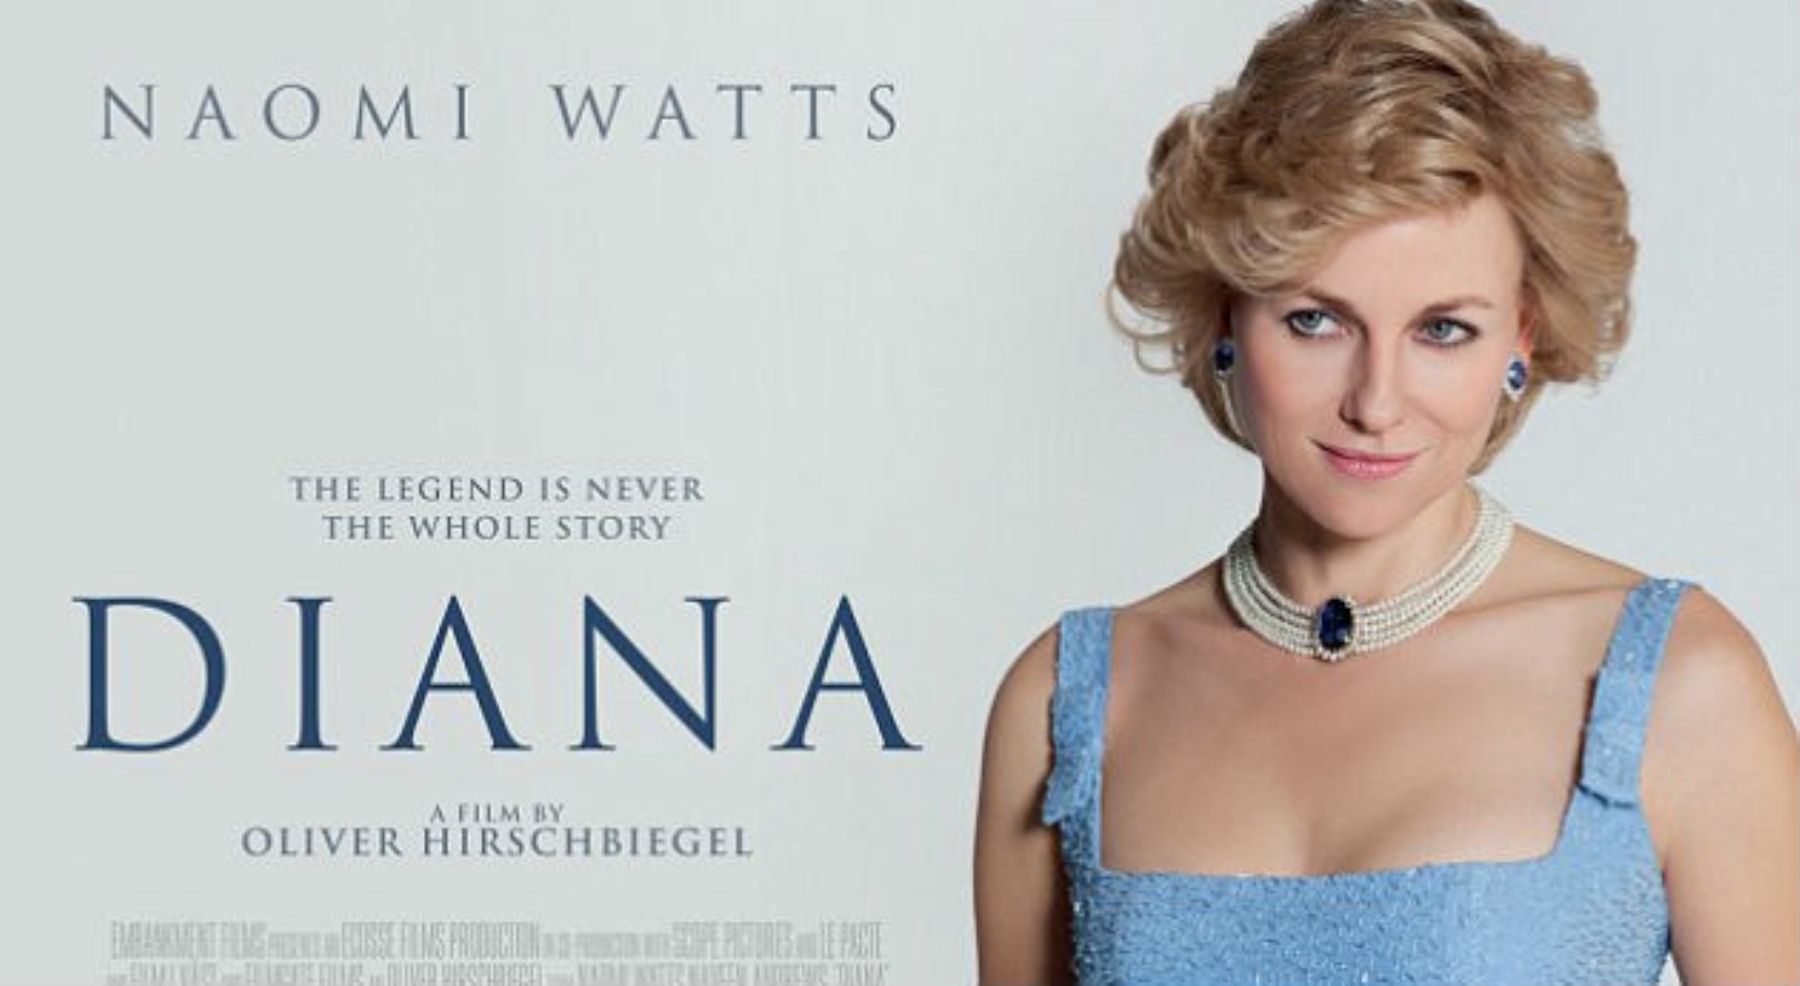 "Diana", a biographical drama film by acclaimed director Oliver Hirschbiegel featuring Diana, Princess of Wales last two years of life